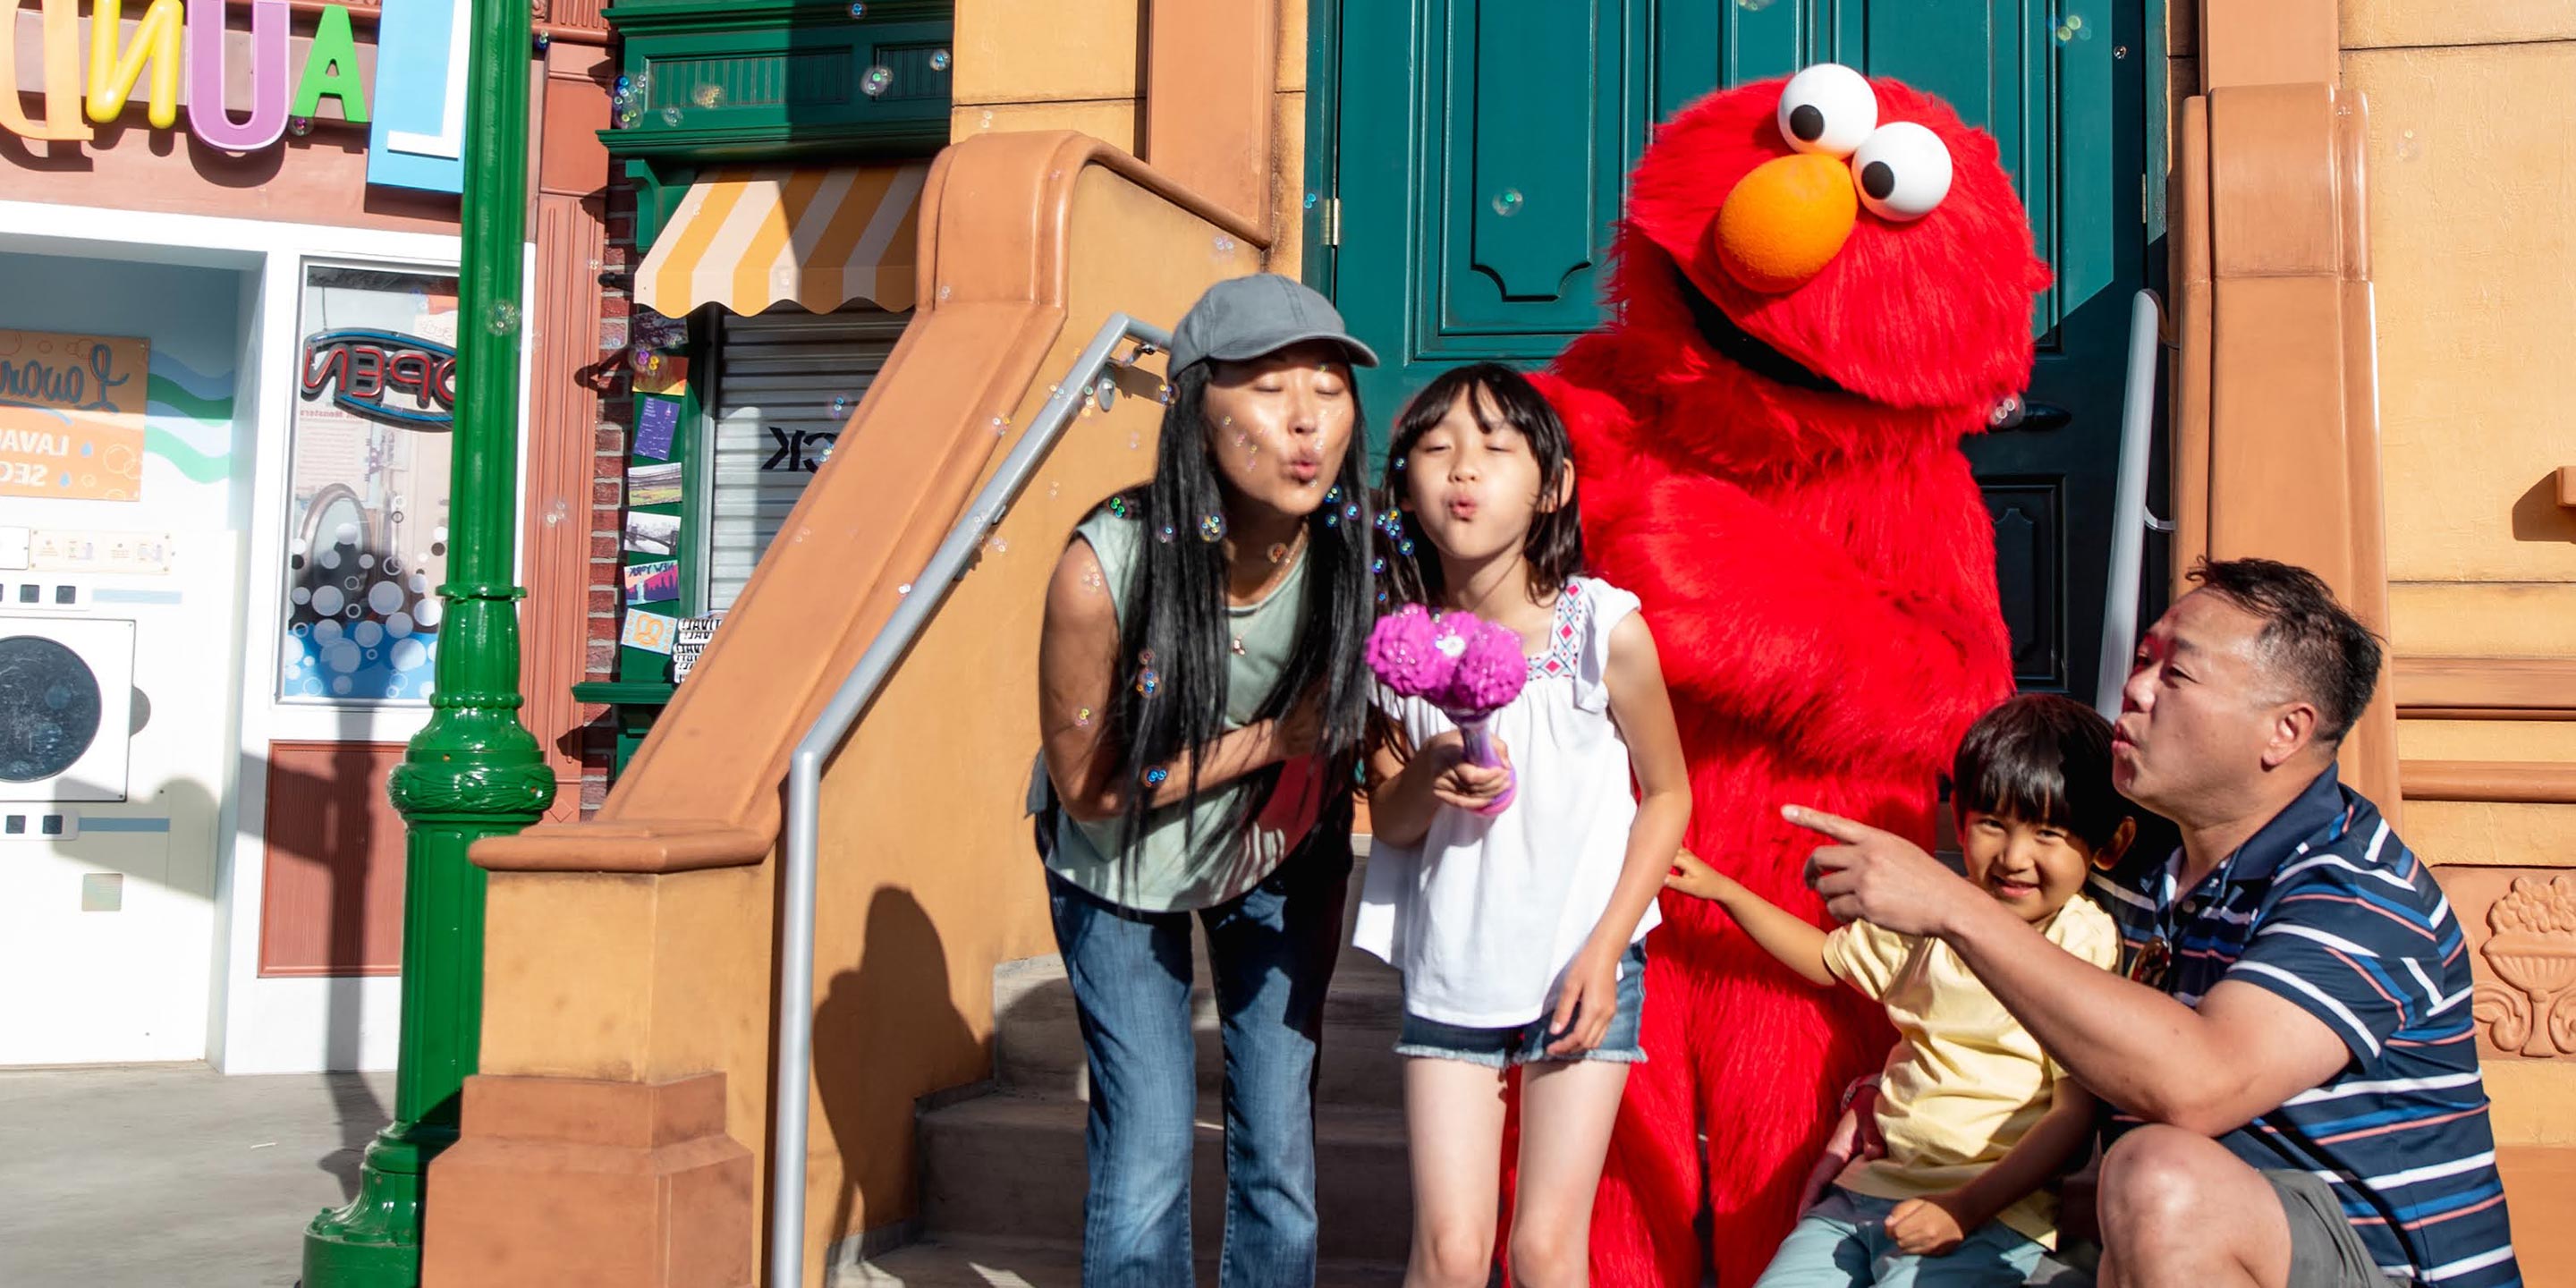 A family sits on the stairs, blowing bubbles into the air, with Elmo